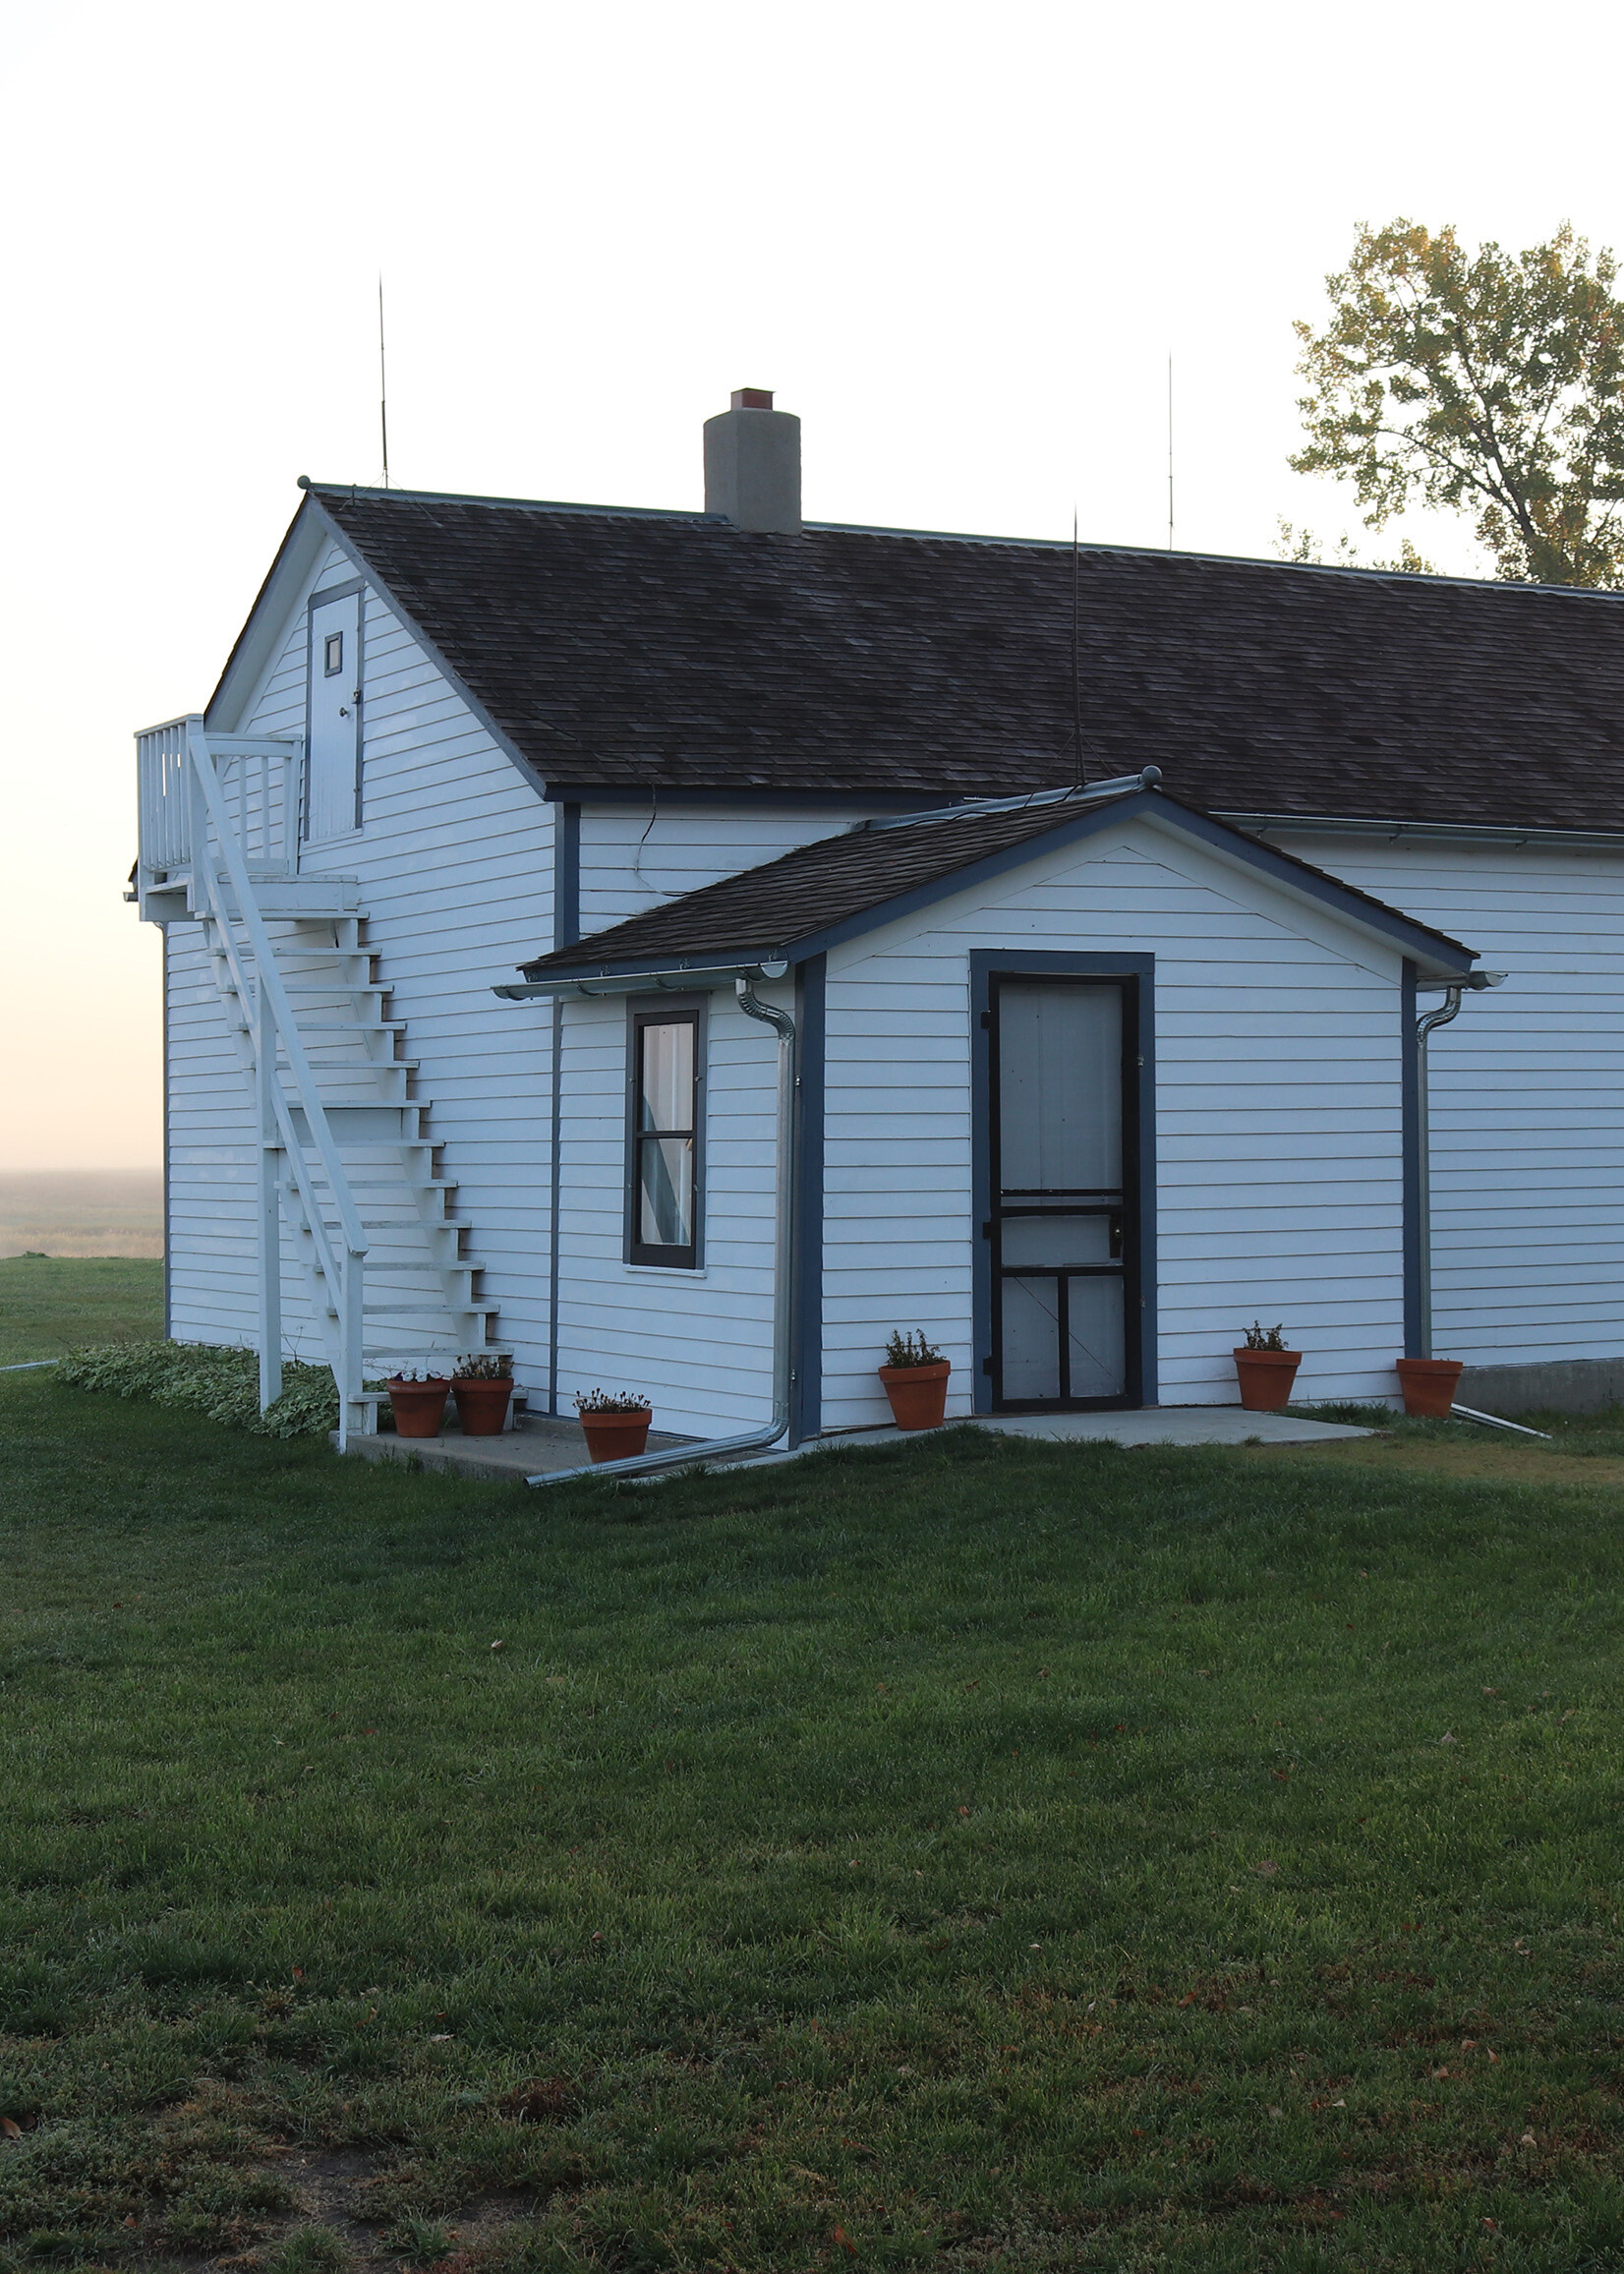 Donate - Welk Homestead State Historic Site